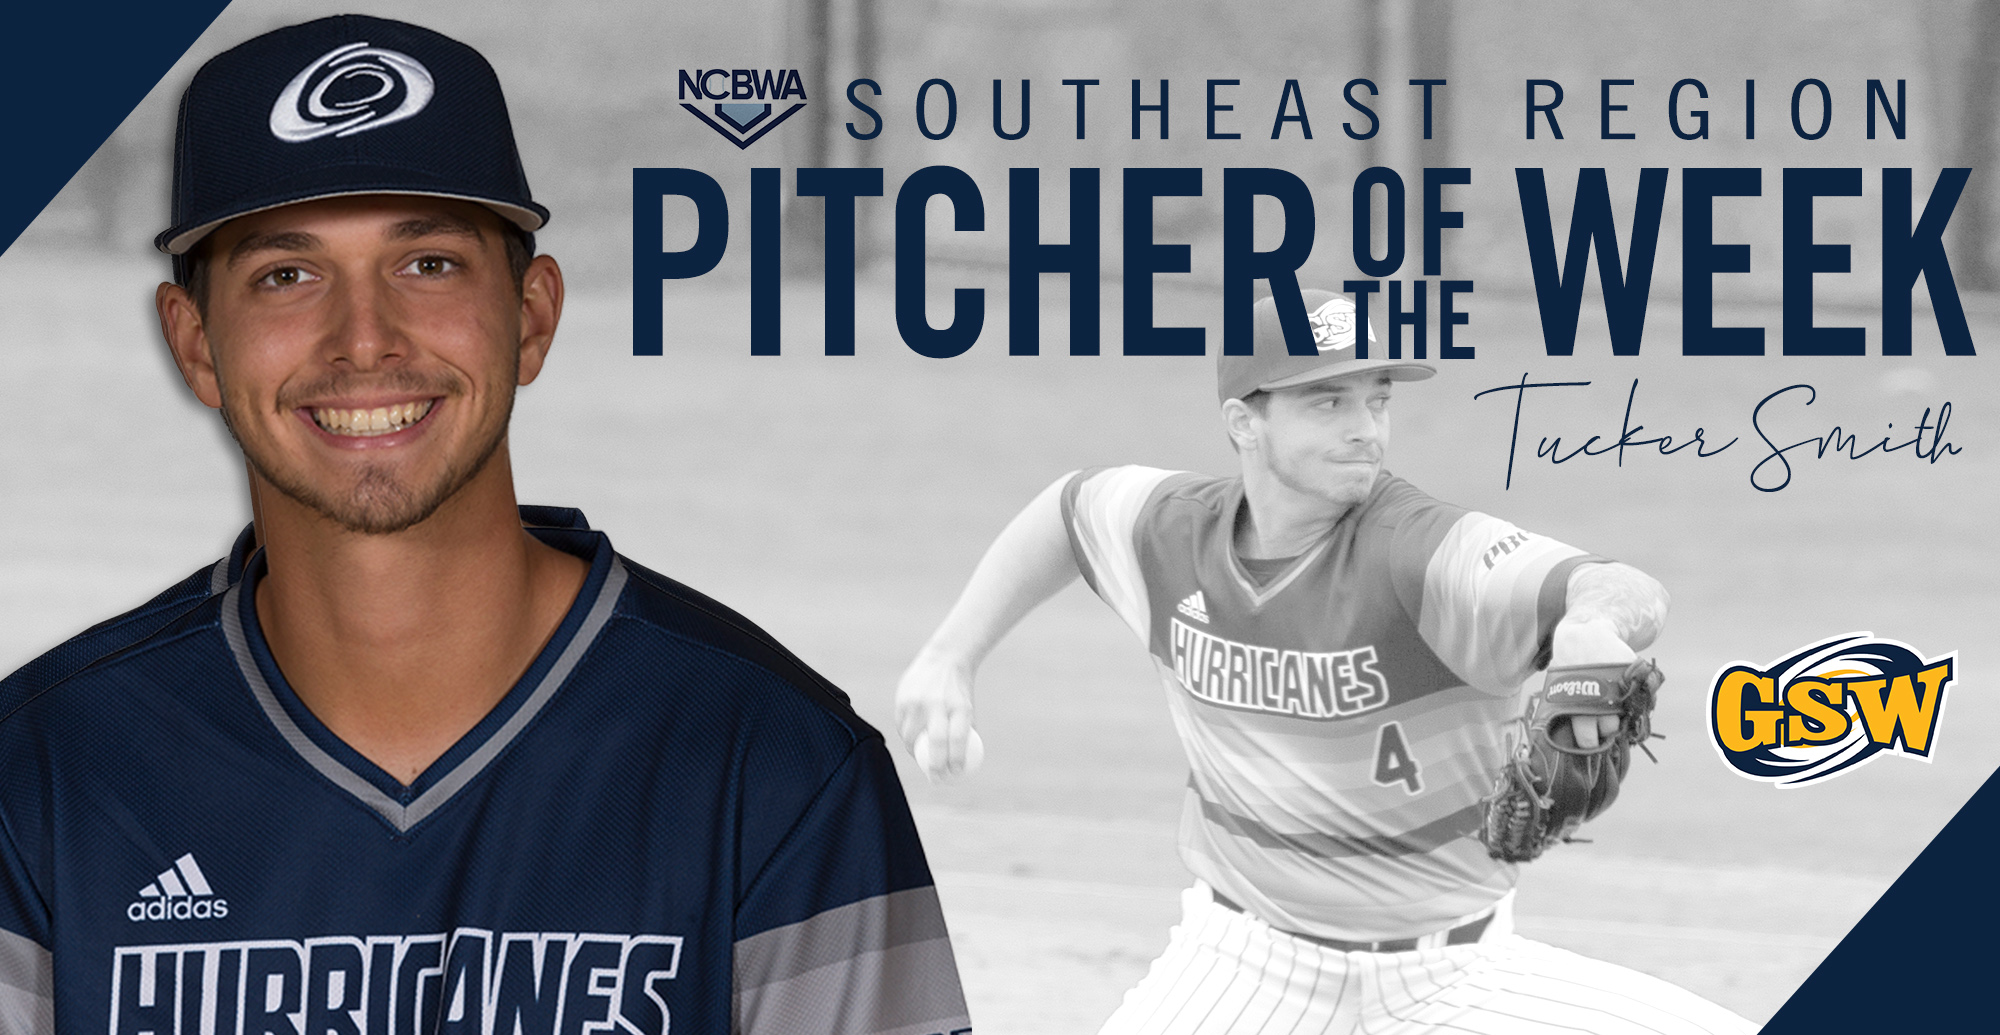 Smith Named Southeast Region Pitcher of the Week